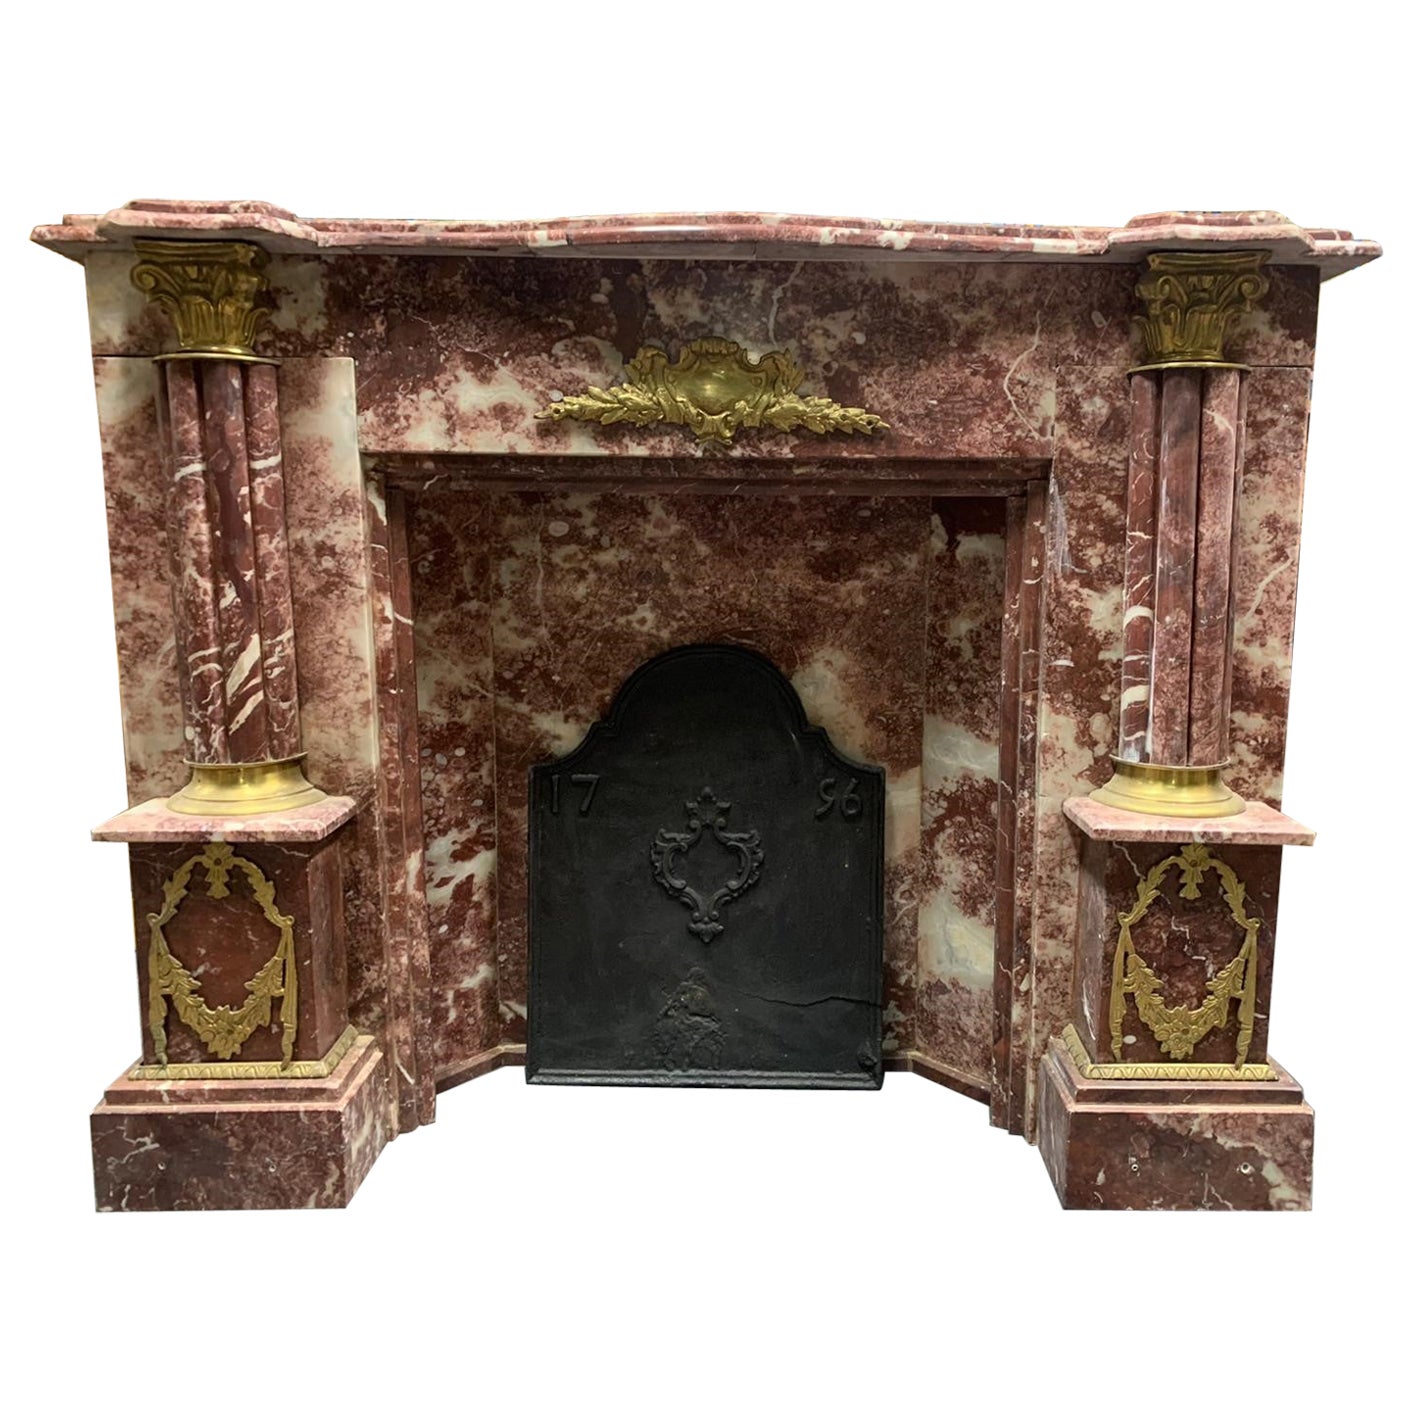 Vintage Fireplace Mantle in Red Marble with Brass Decorations, 1920s Italy